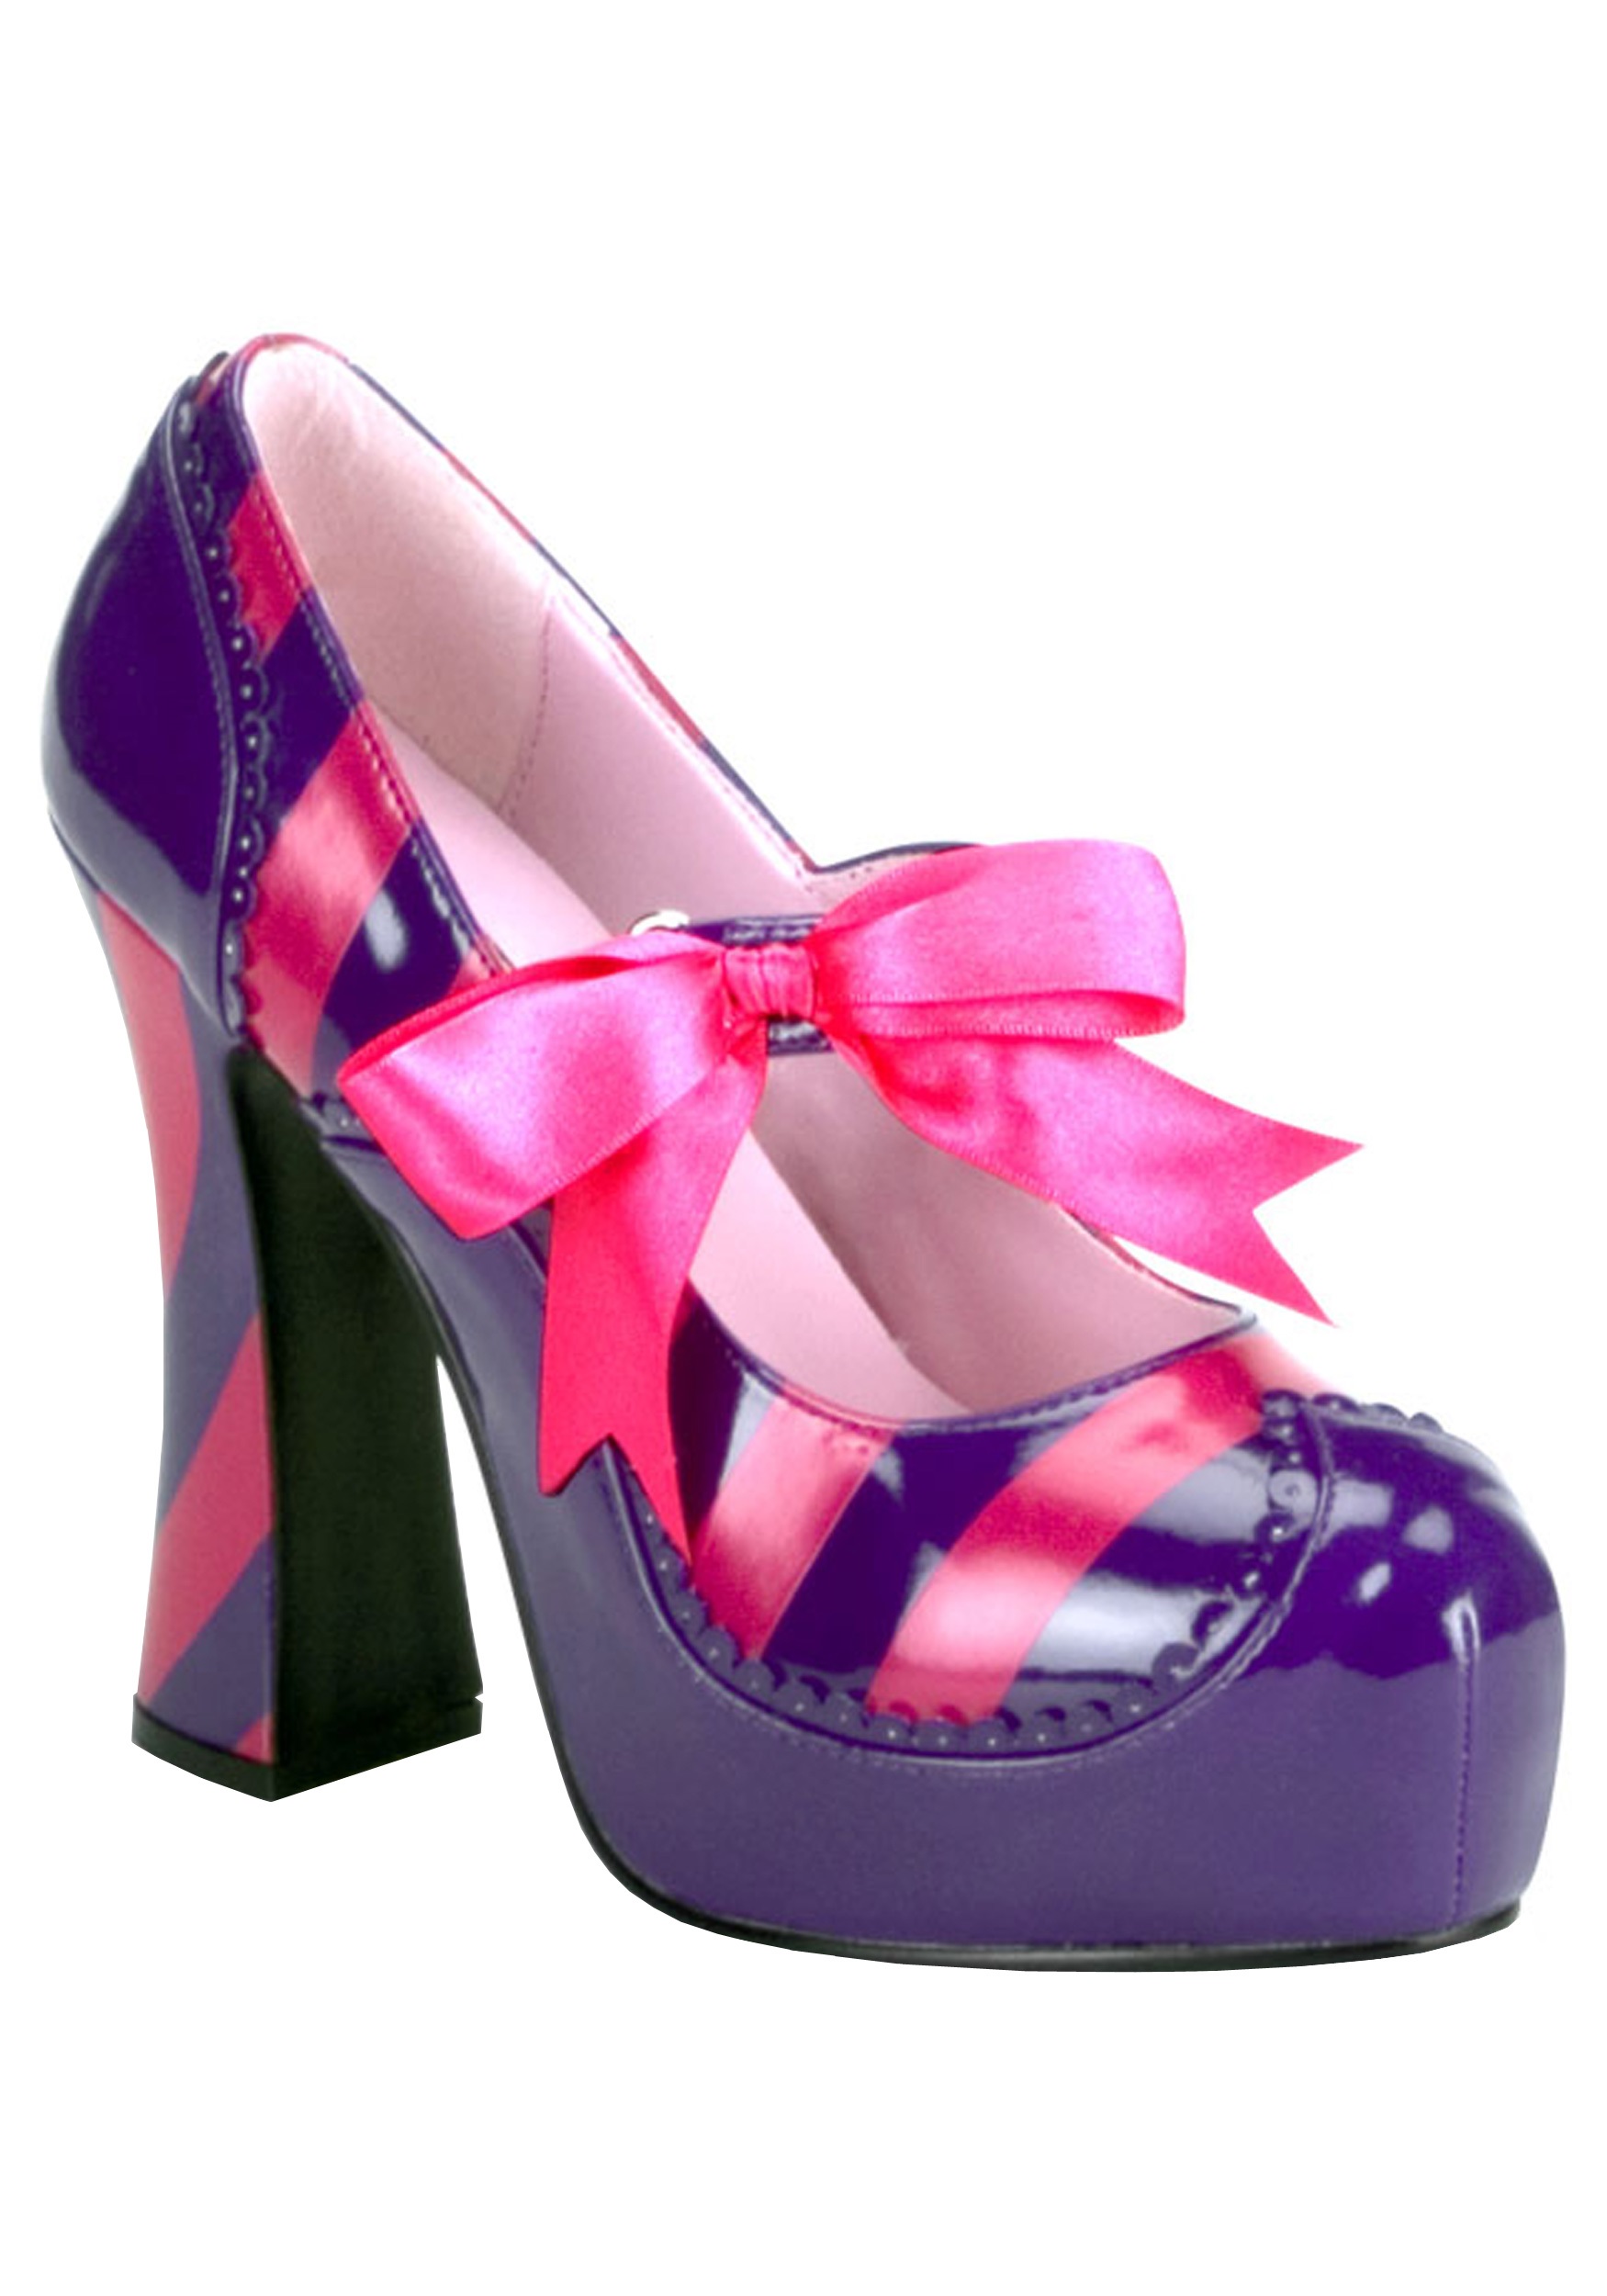 Cheshire Cat Costume Shoes for Women